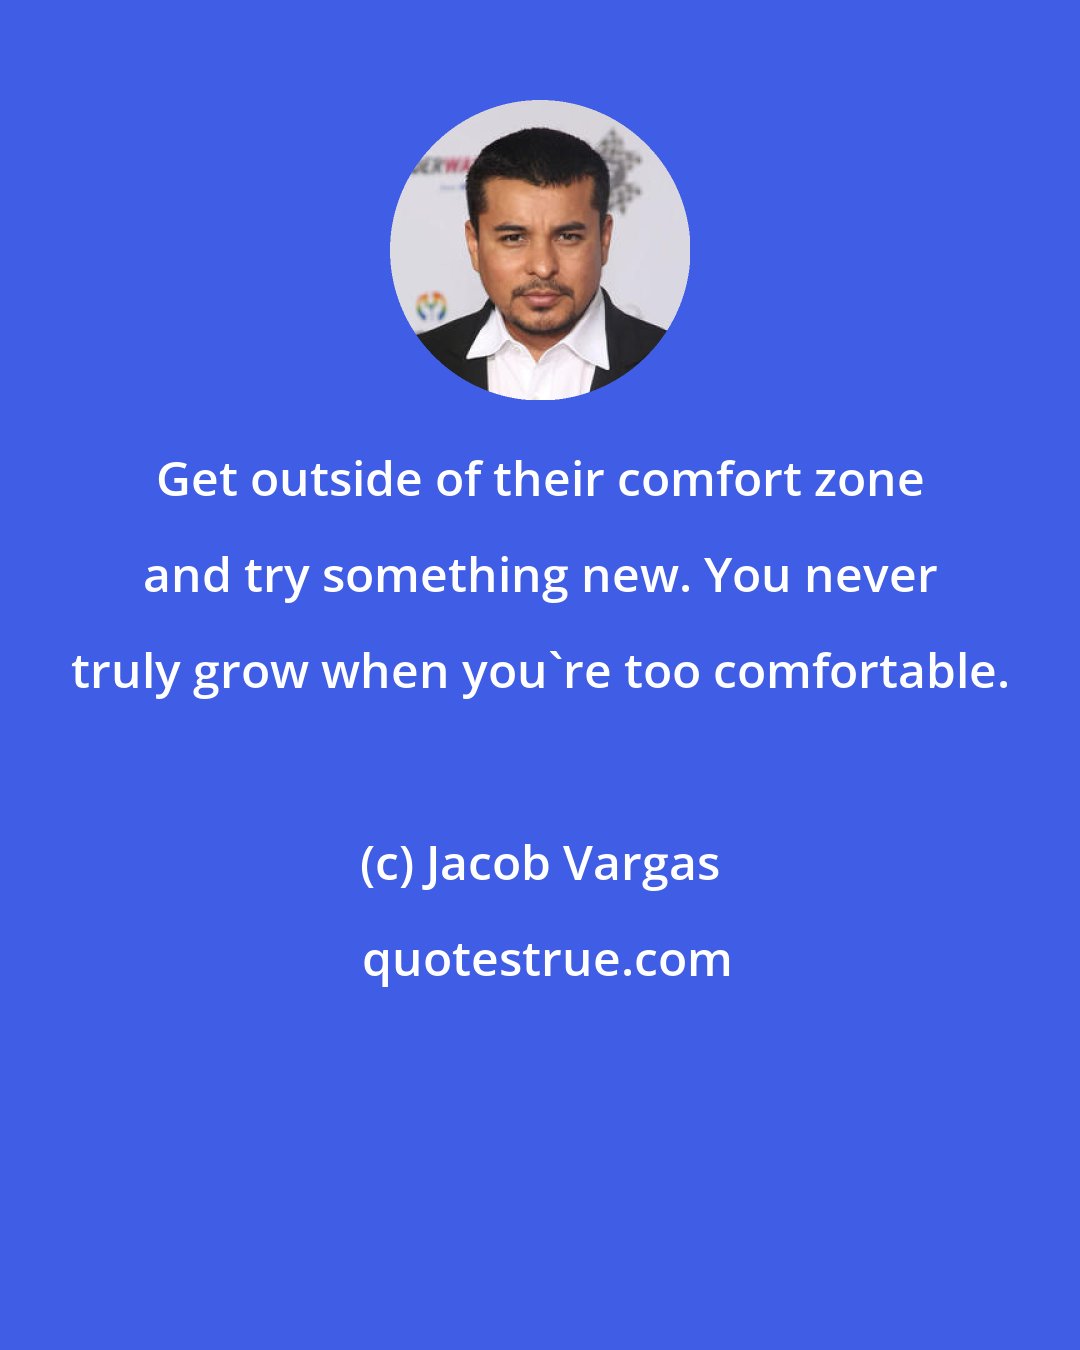 Jacob Vargas: Get outside of their comfort zone and try something new. You never truly grow when you're too comfortable.